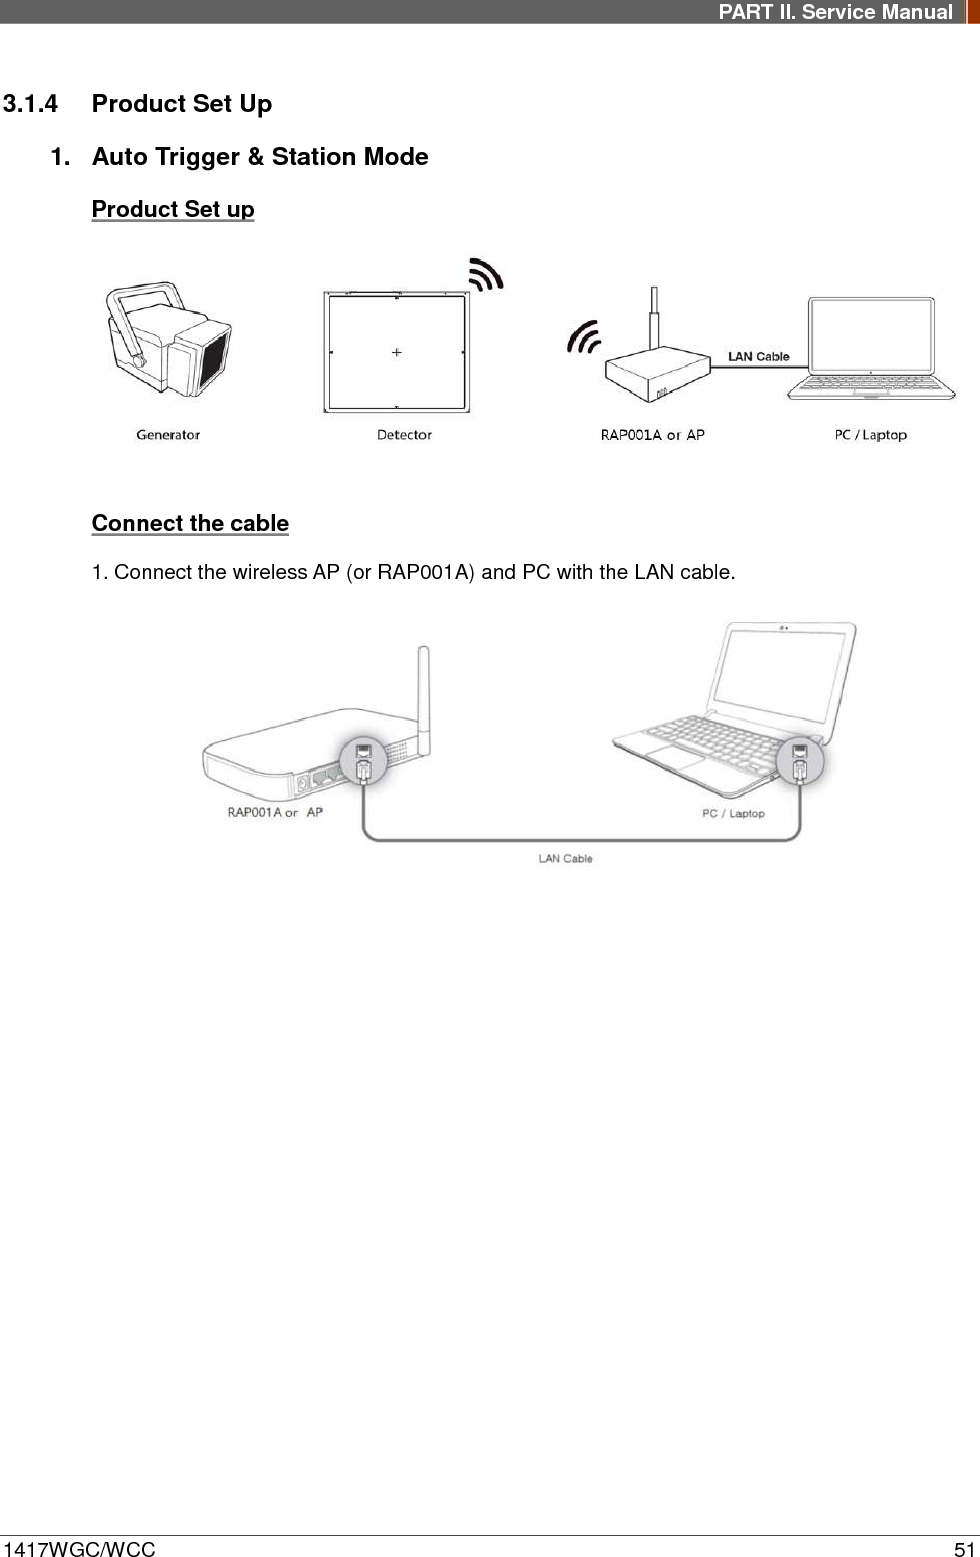 PART II. Service Manual  1417WGC/WCC 51 3.1.4 Product Set Up 1. Auto Trigger &amp; Station Mode Product Set up   Connect the cable 1. Connect the wireless AP (or RAP001A) and PC with the LAN cable.     